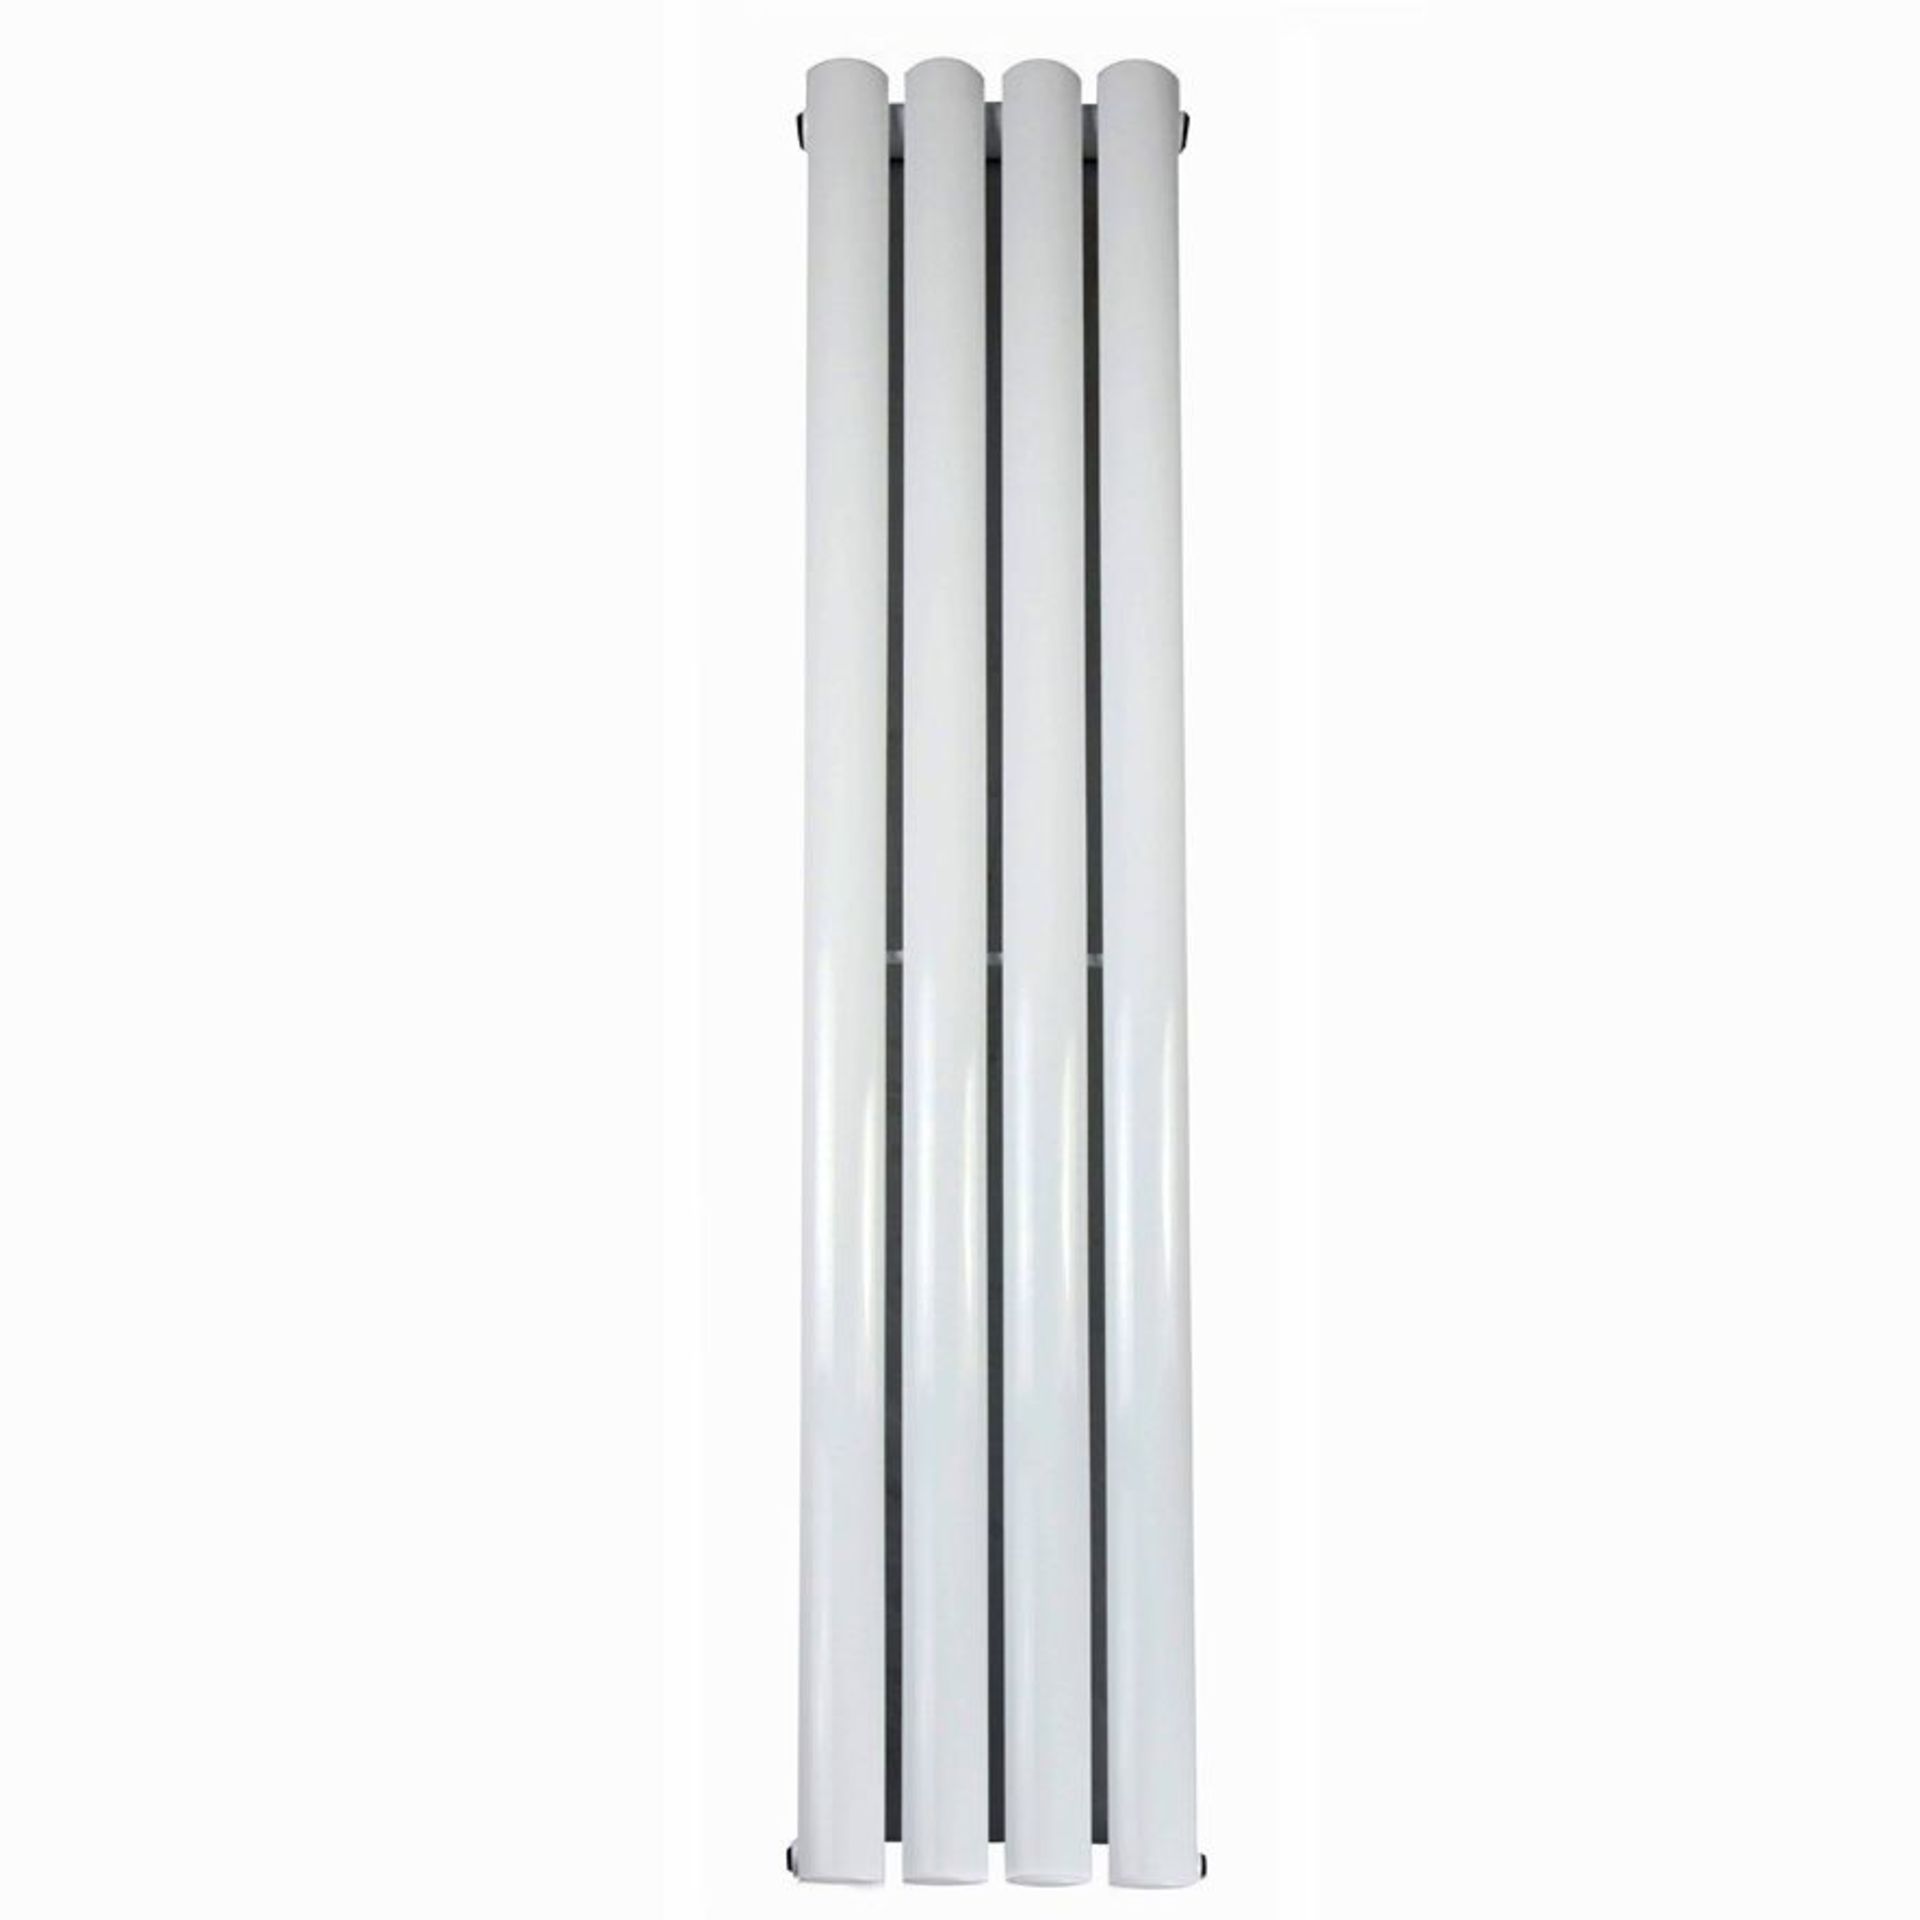 New & Boxed 1600x240mm Gloss White Single Oval Tube Vertical Radiator. RRP £461.99.... New &___New &